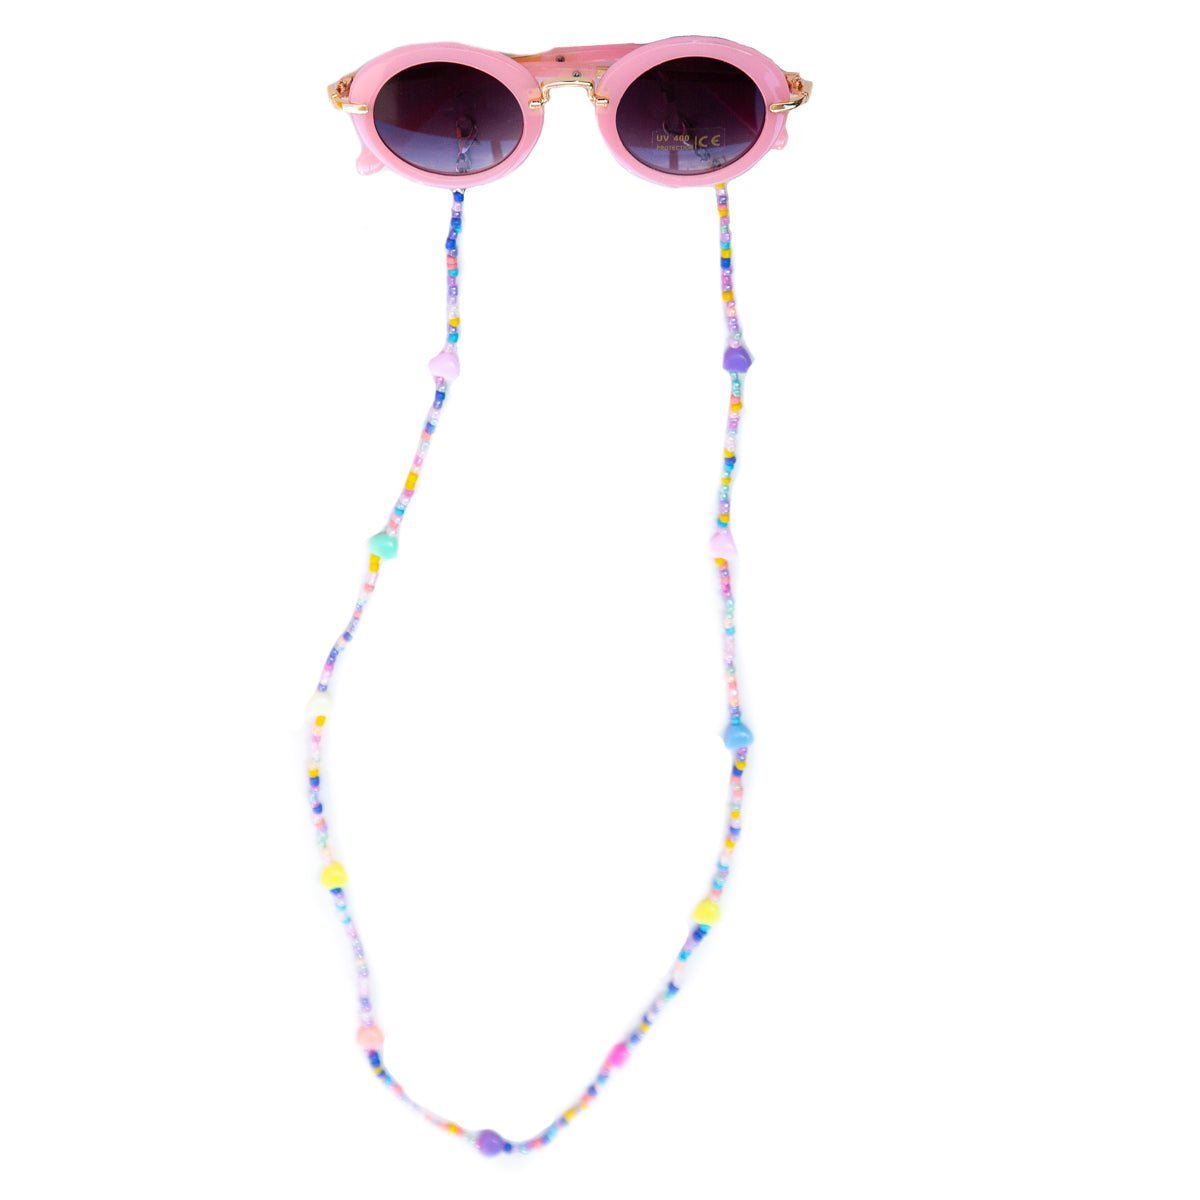 ROUND SUNGLASSES WITH PASTEL HEARTS CHAIN - SUNGLASSES